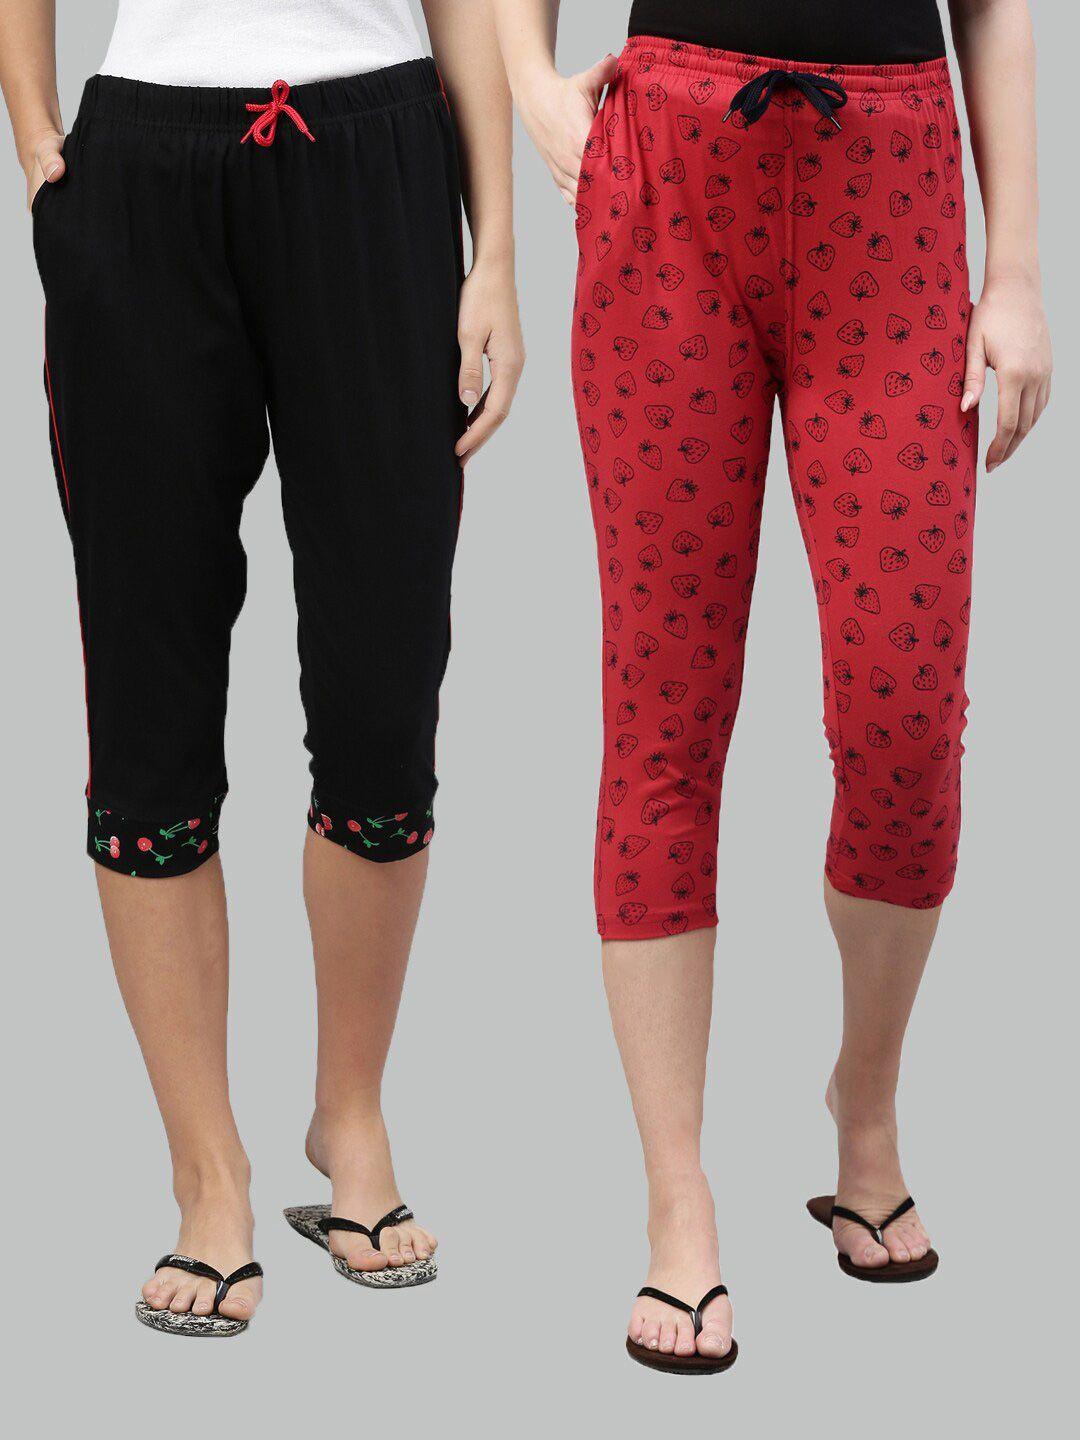 kryptic women black & red printed pure cotton capris pack of 2